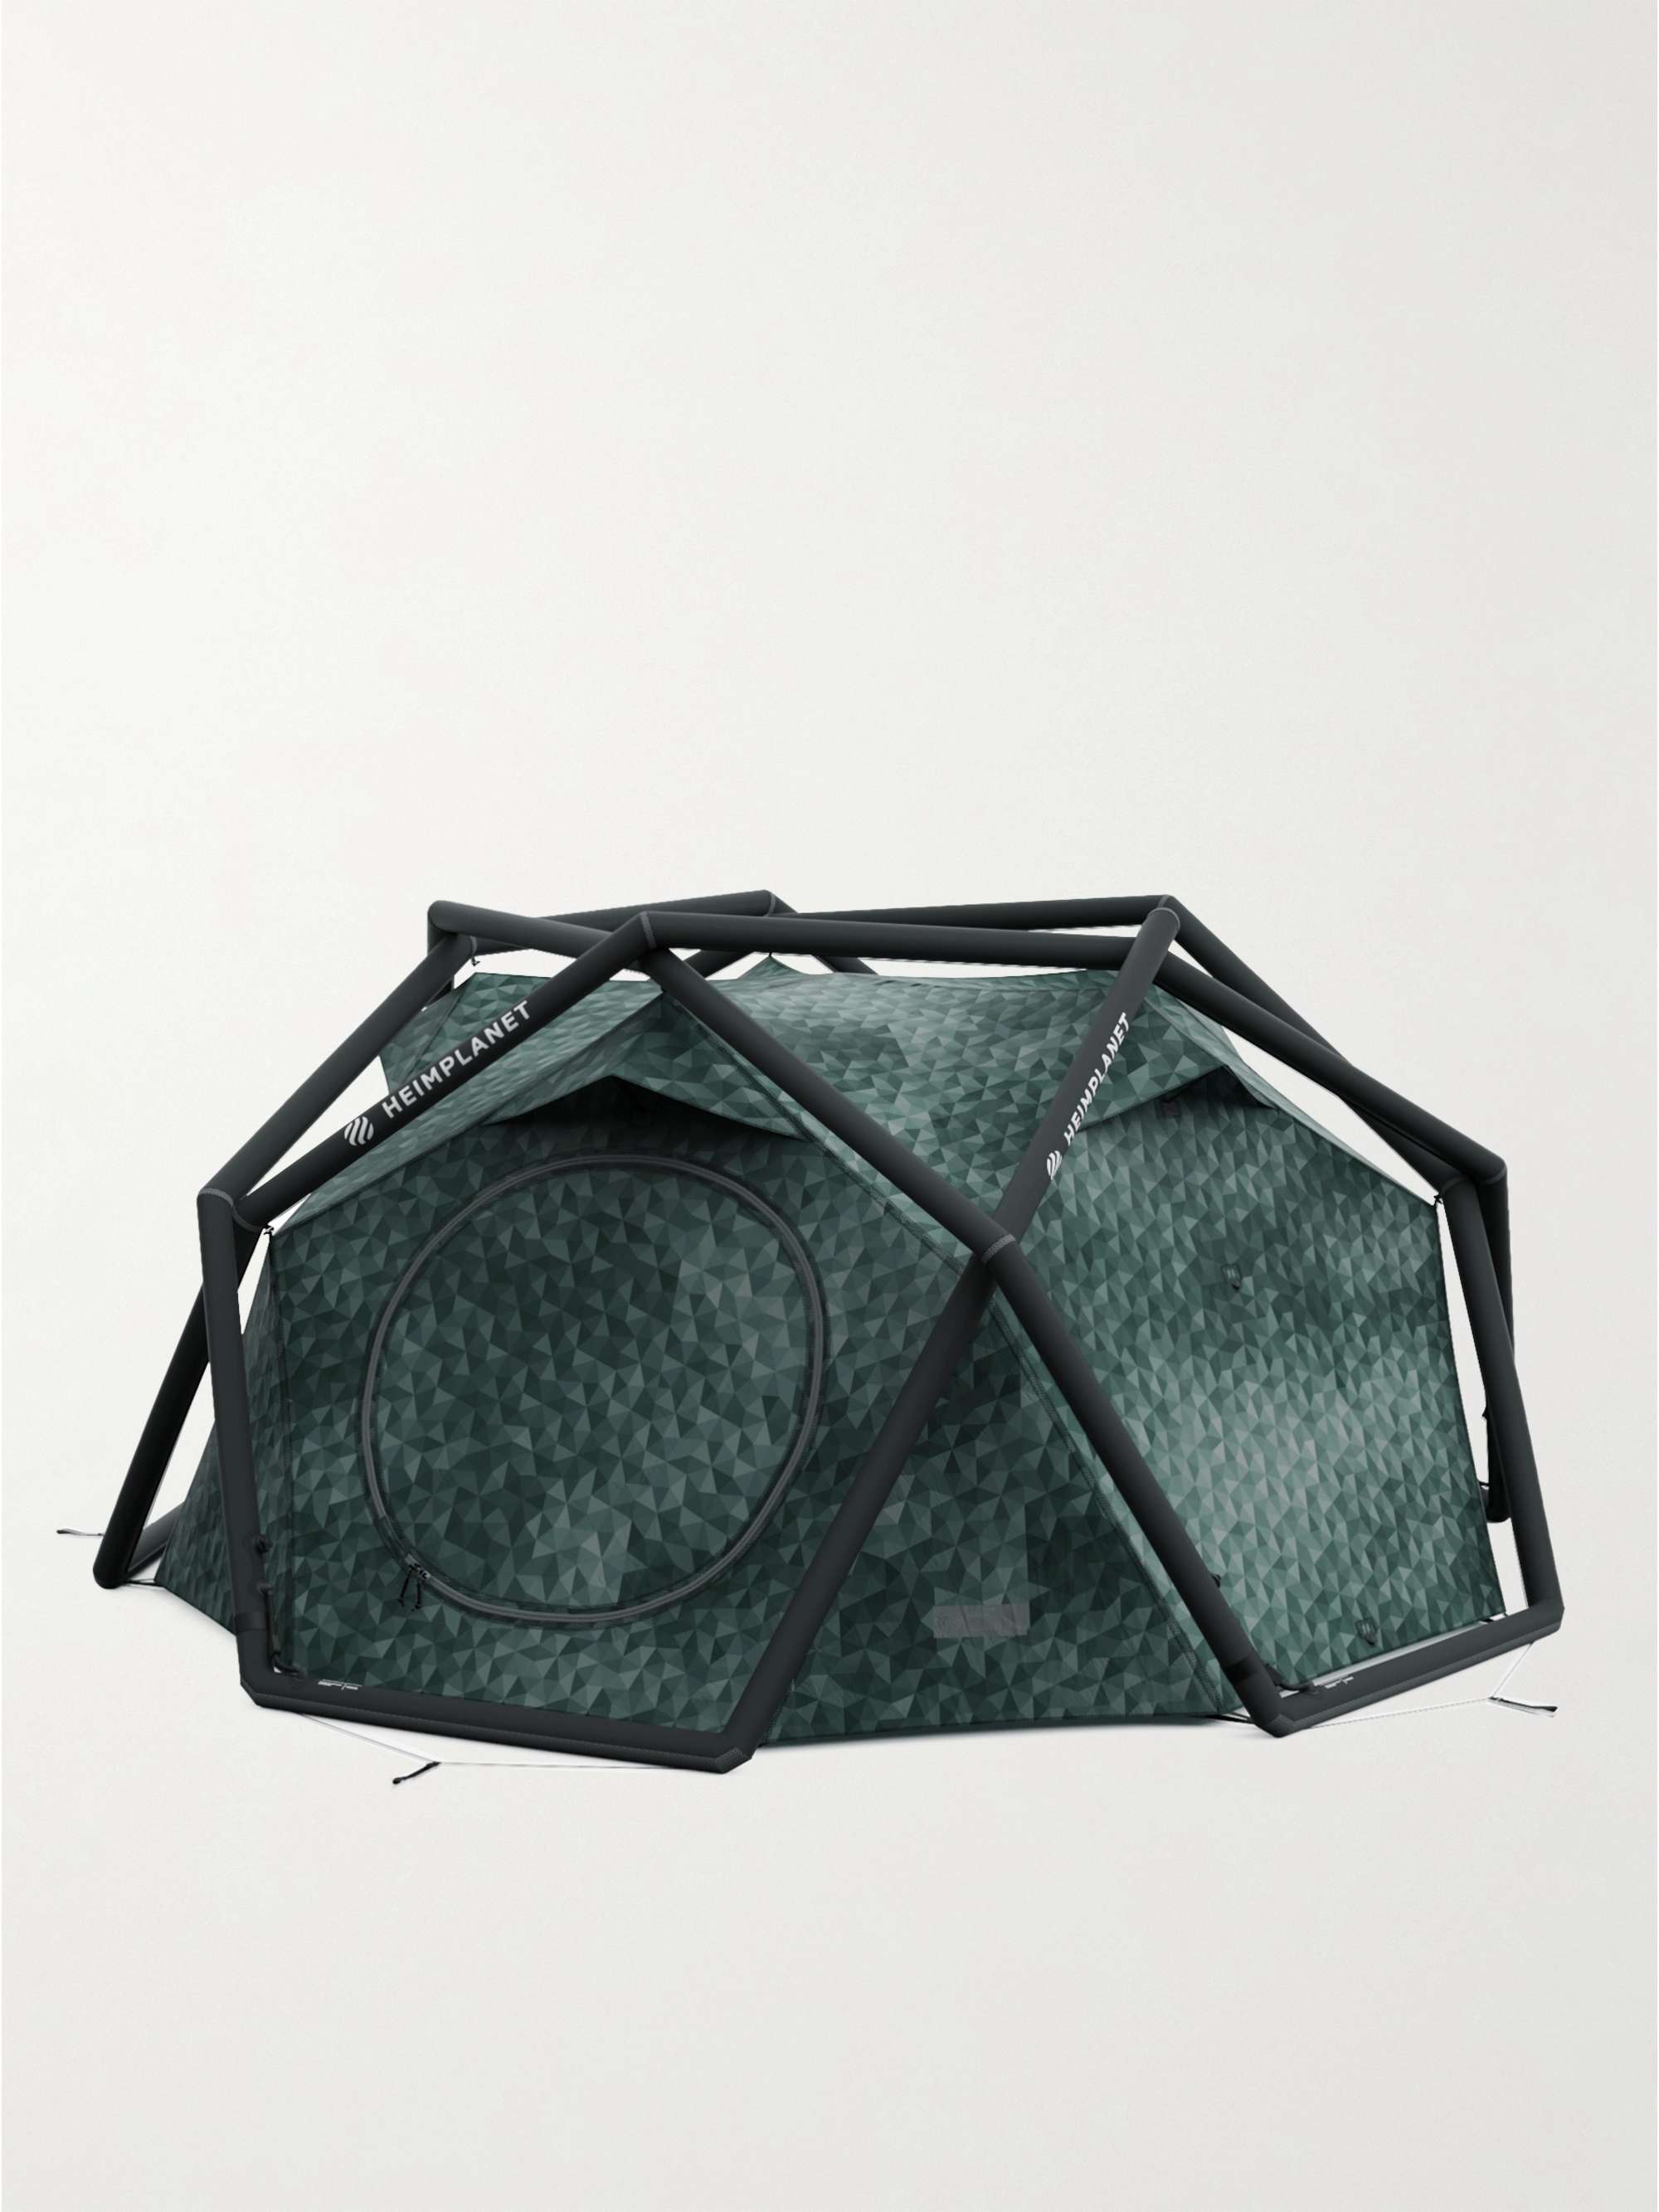 HEIMPLANET The Cave XL Ripstop Tent | MR PORTER